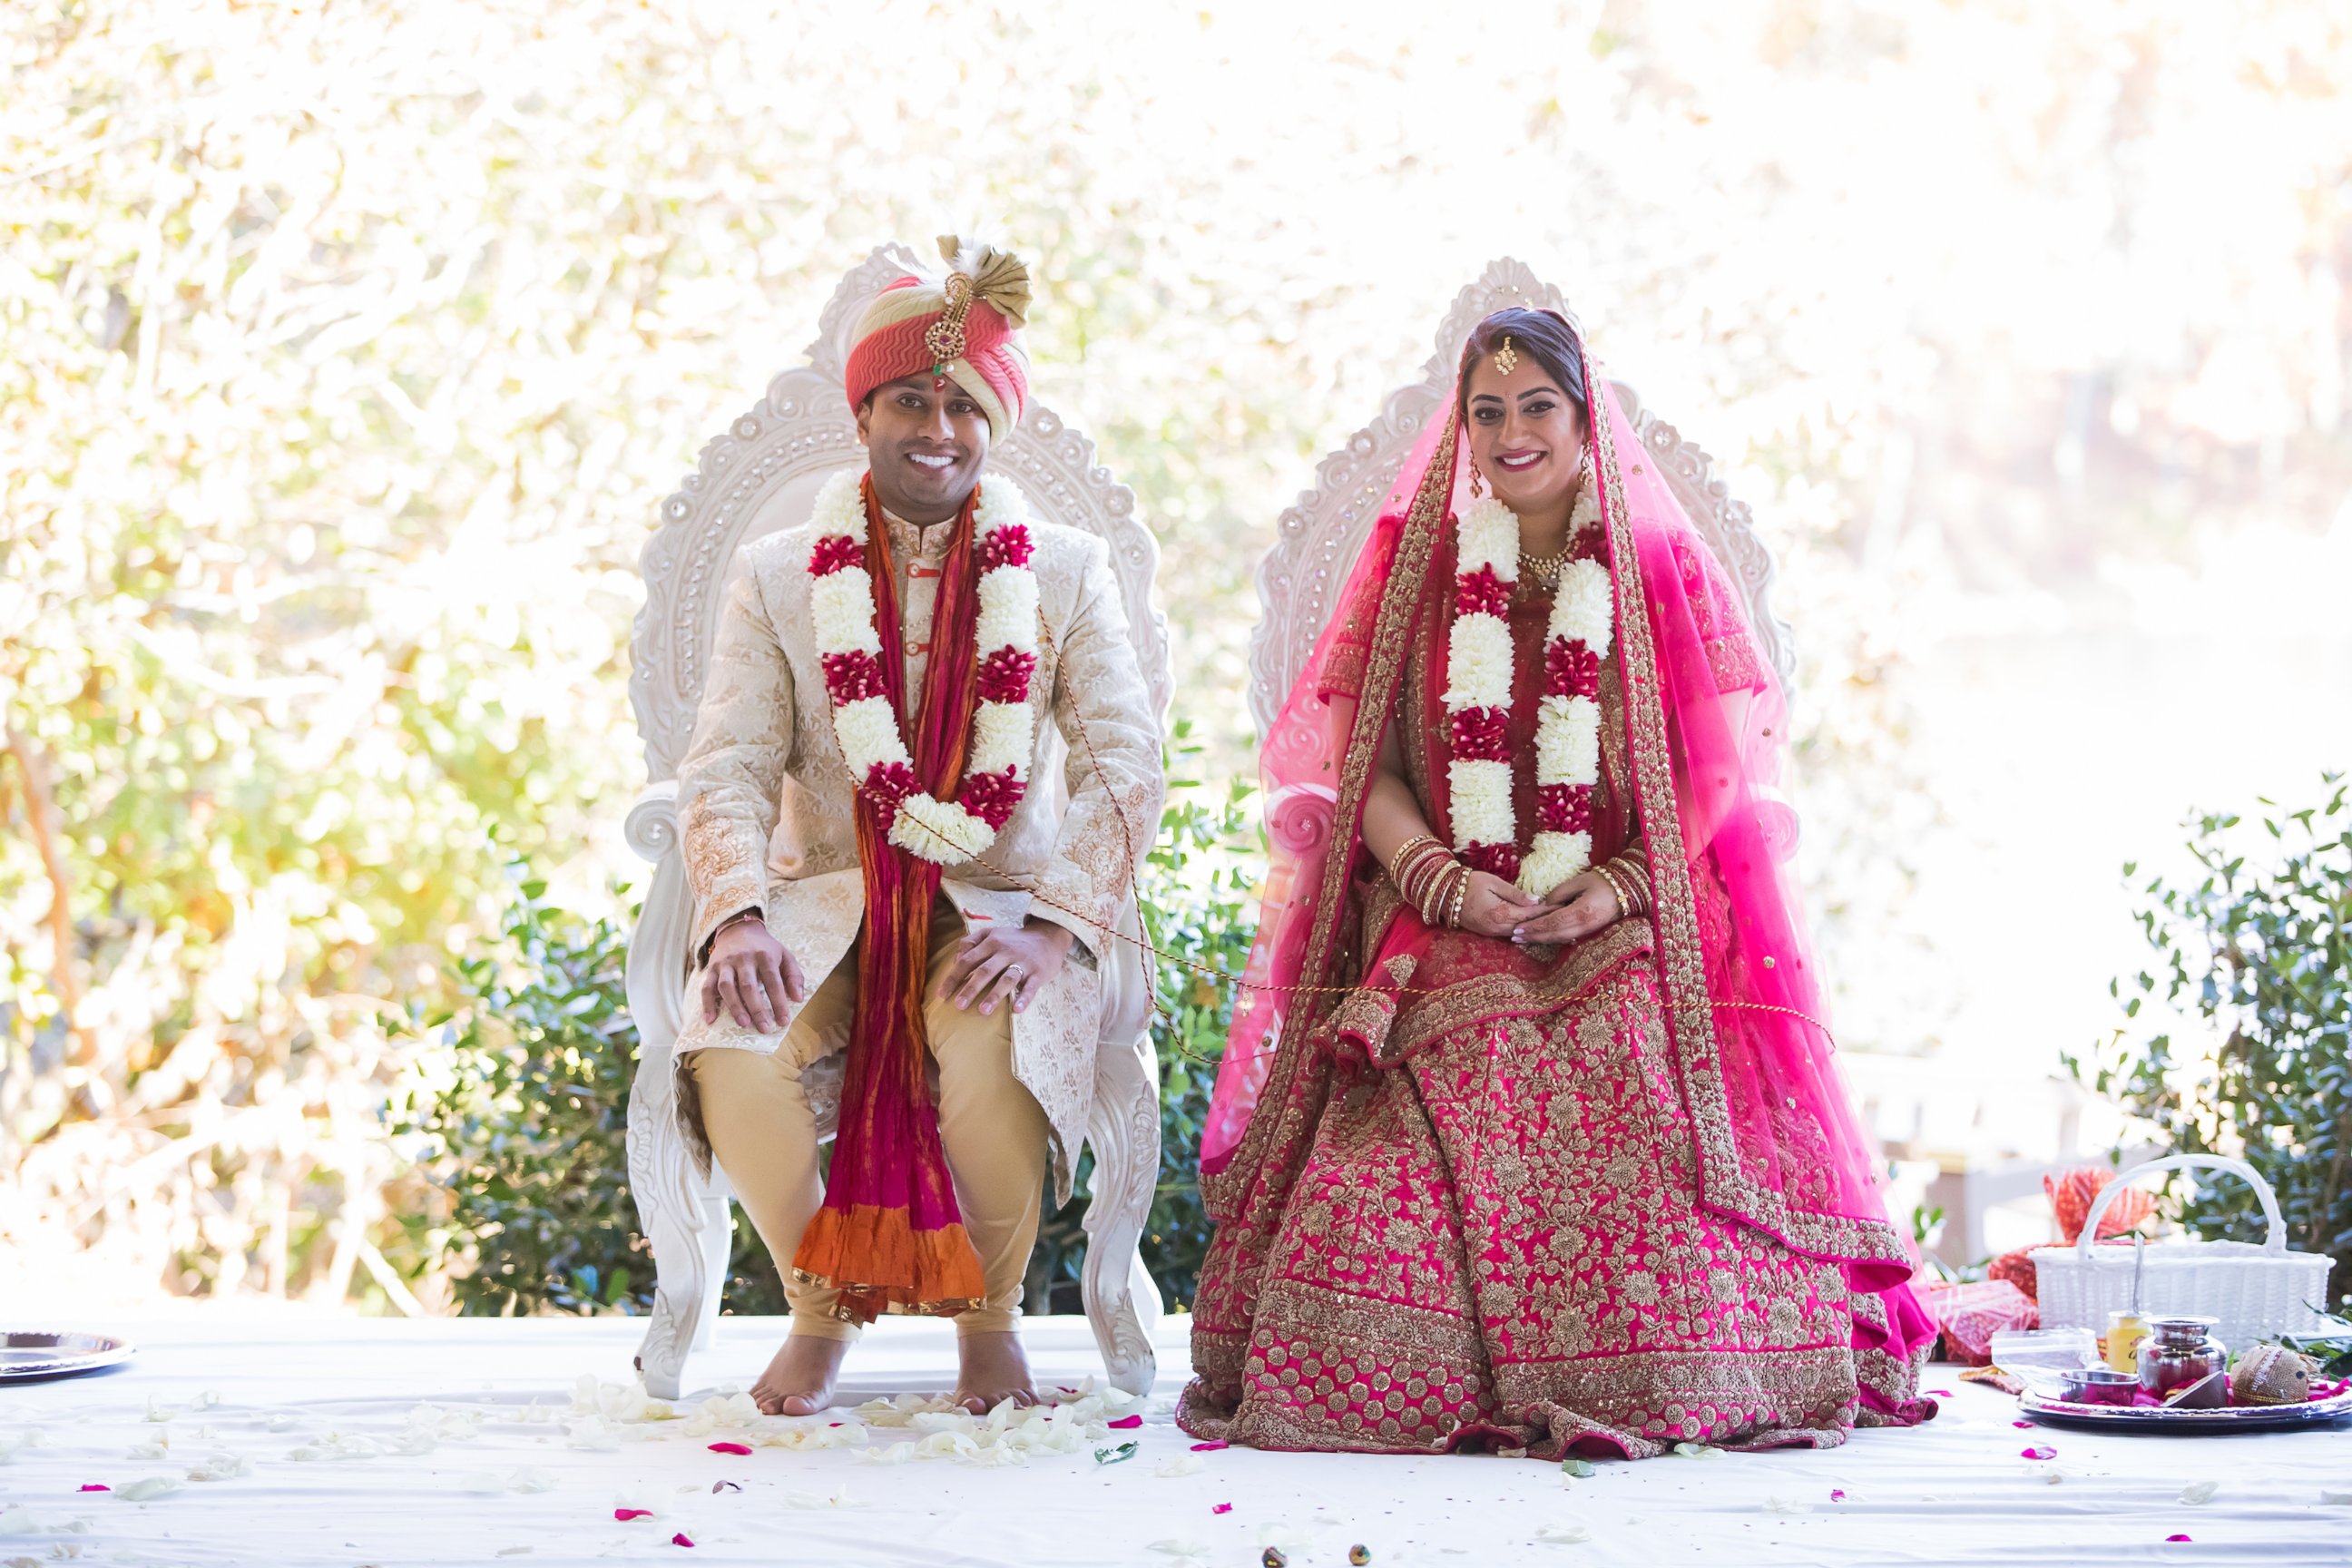 PHOTO: Tweethearts Sumita Dalmia and Anuj Patel, who met on Twitter, had a Twitter-themed wedding in Atlanta, inviting 450 guests over the span of three days.